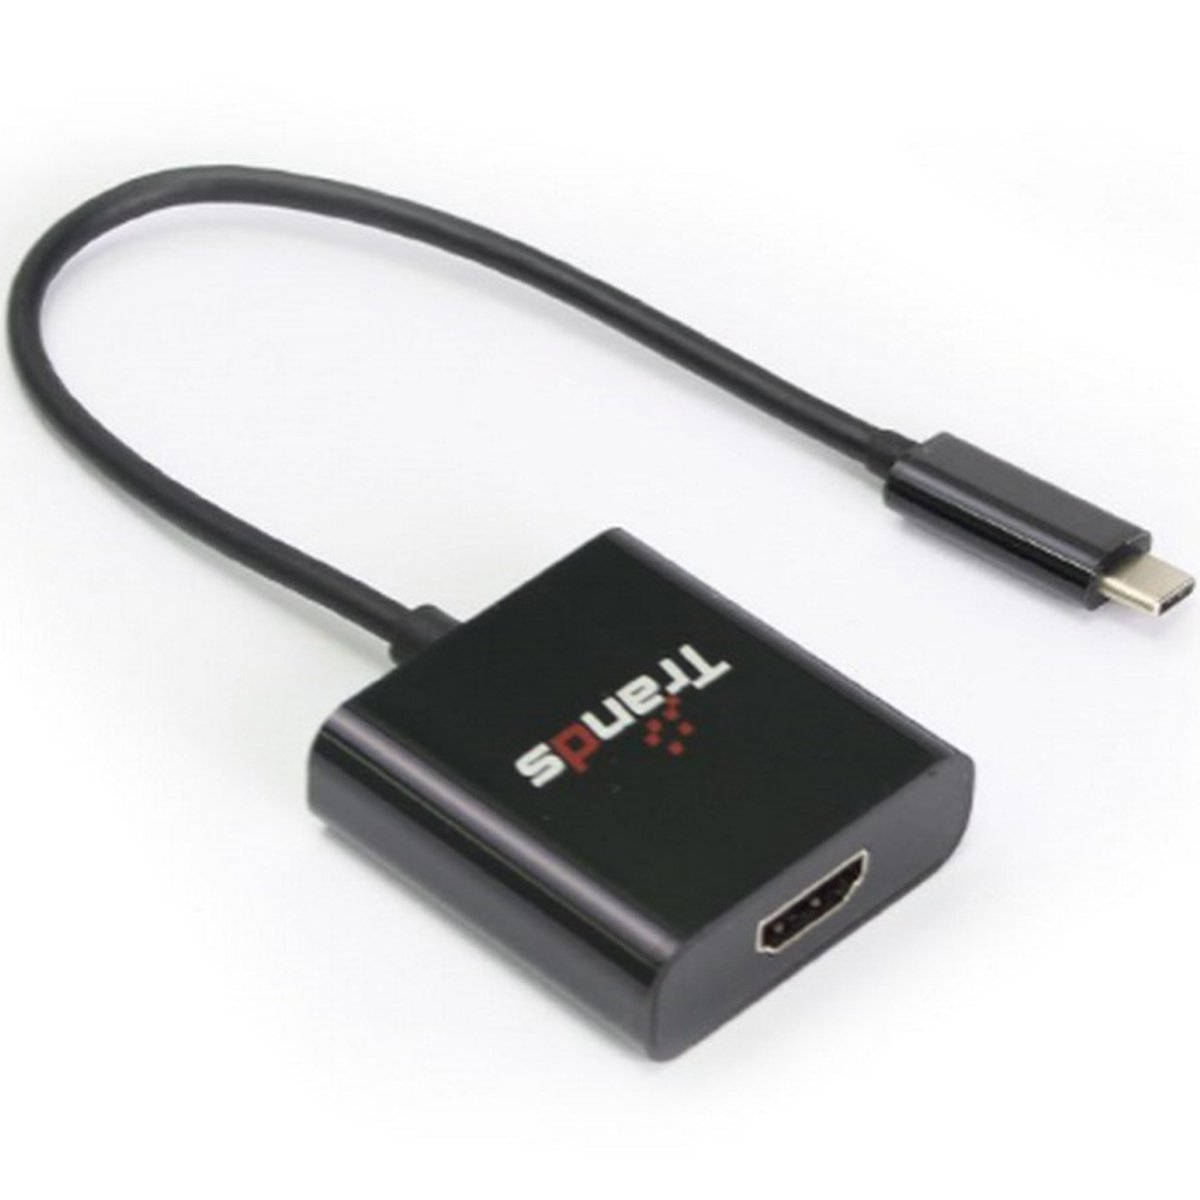 Trands Type C to HDMI Female Adaptr Cable TRCA419